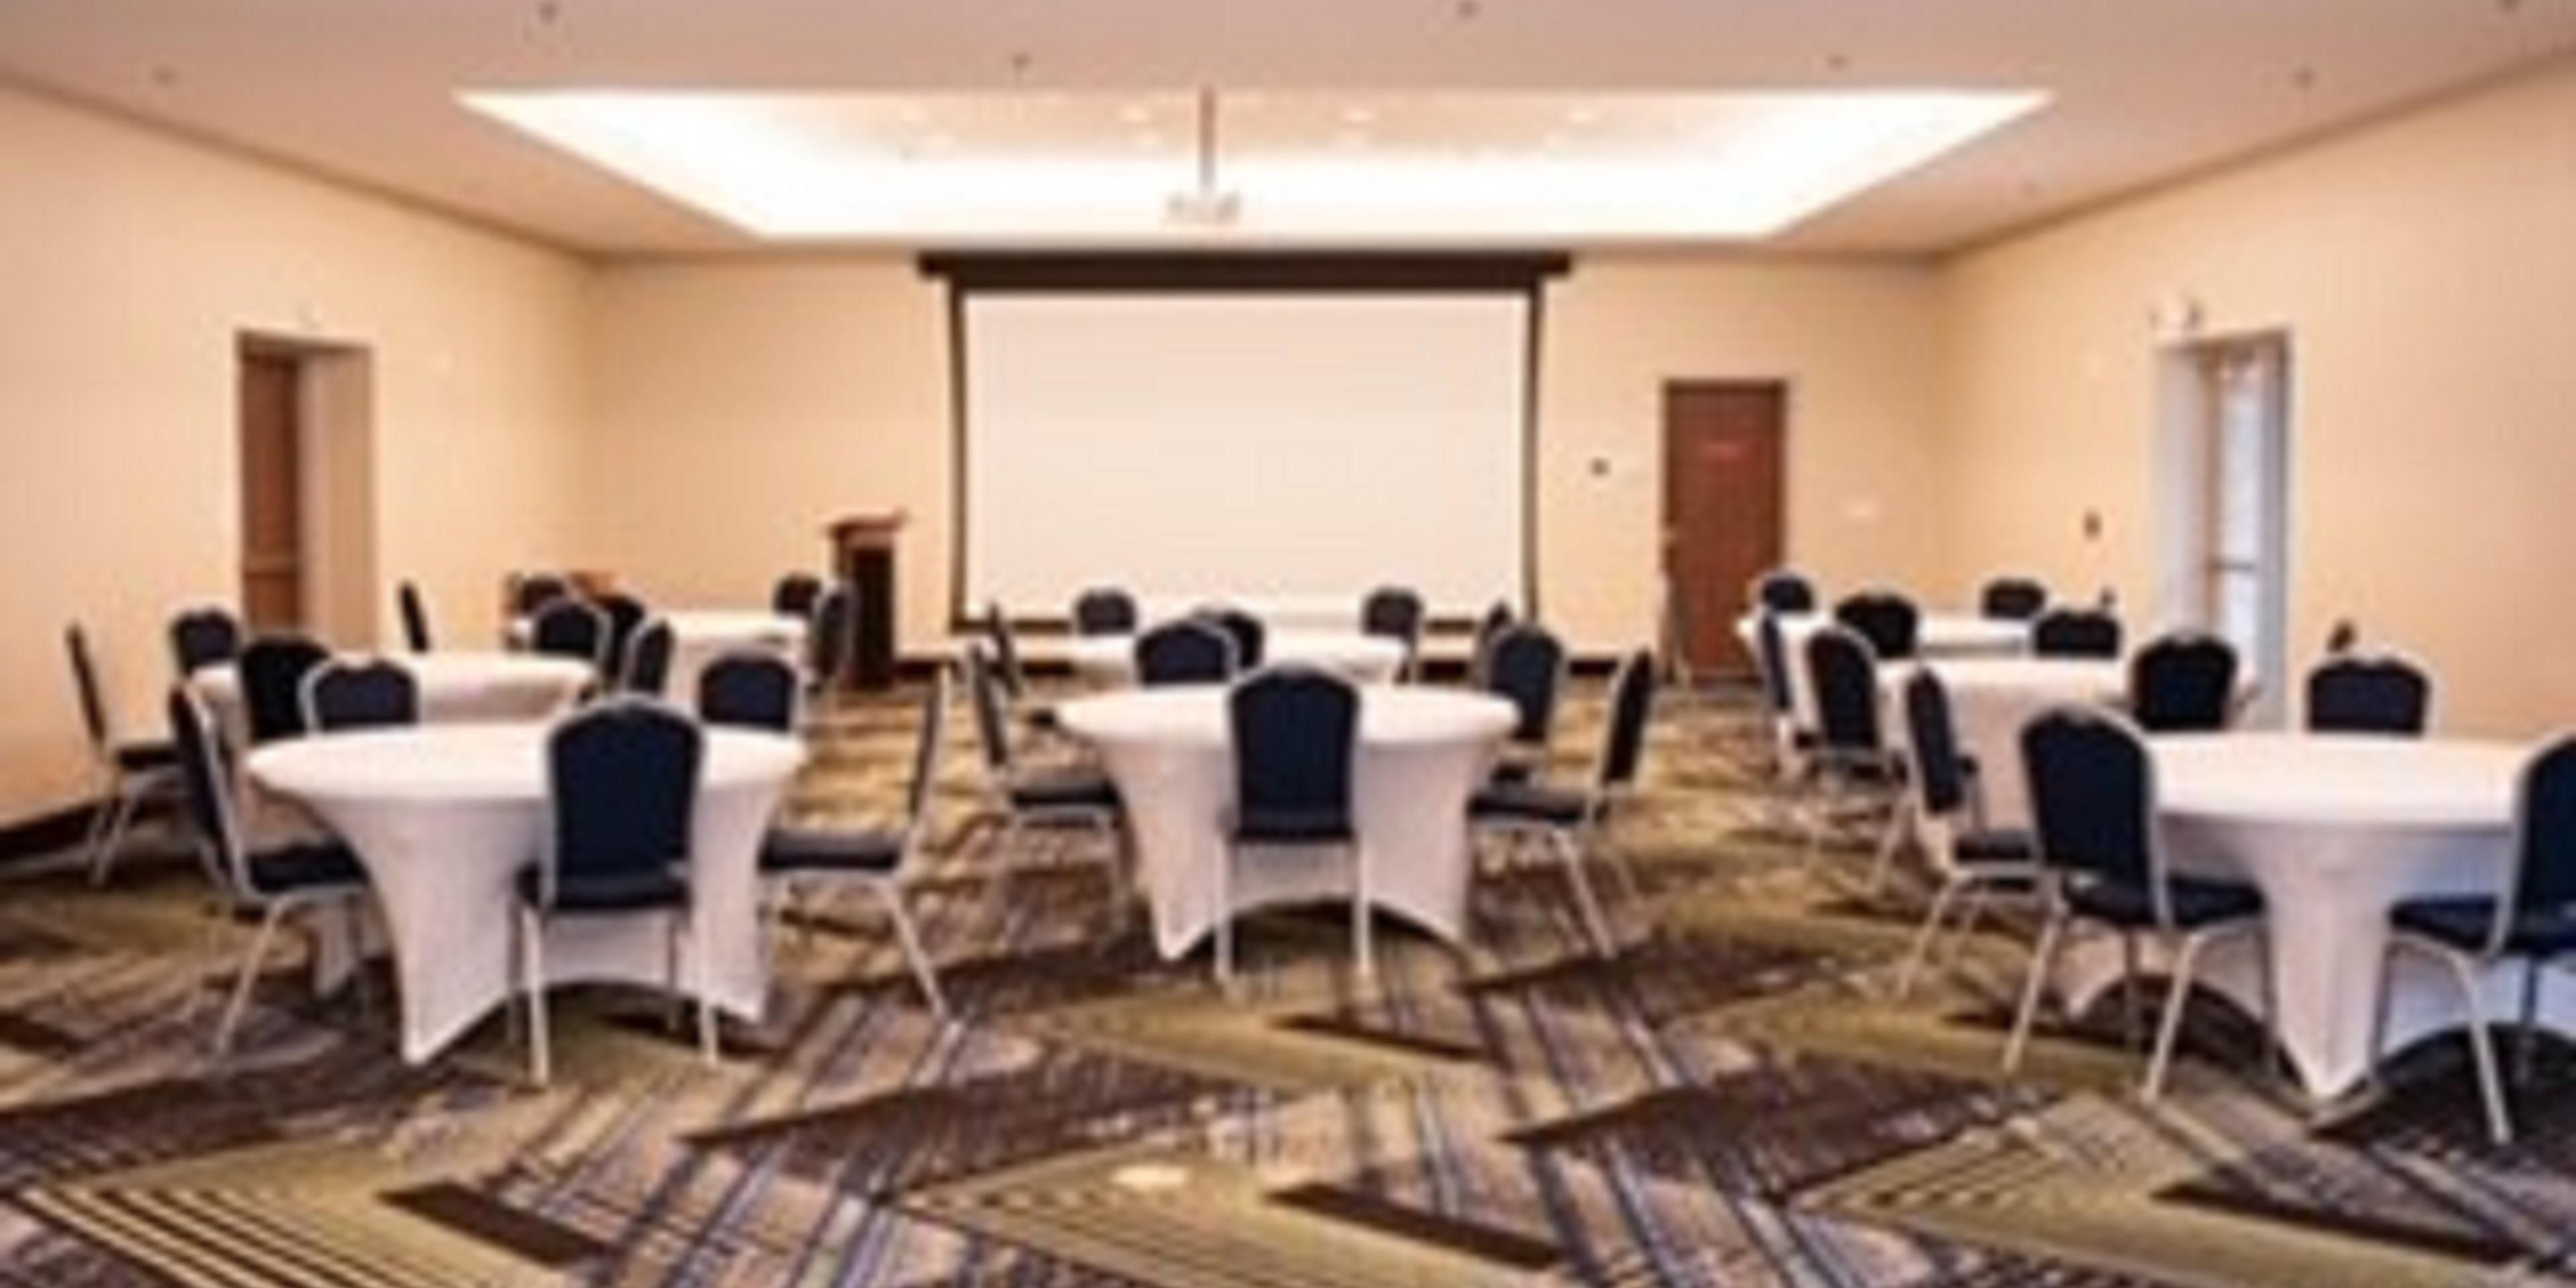 Whether you are booking a small business meeting or an intimate gathering, we offer the perfect setting for your event.